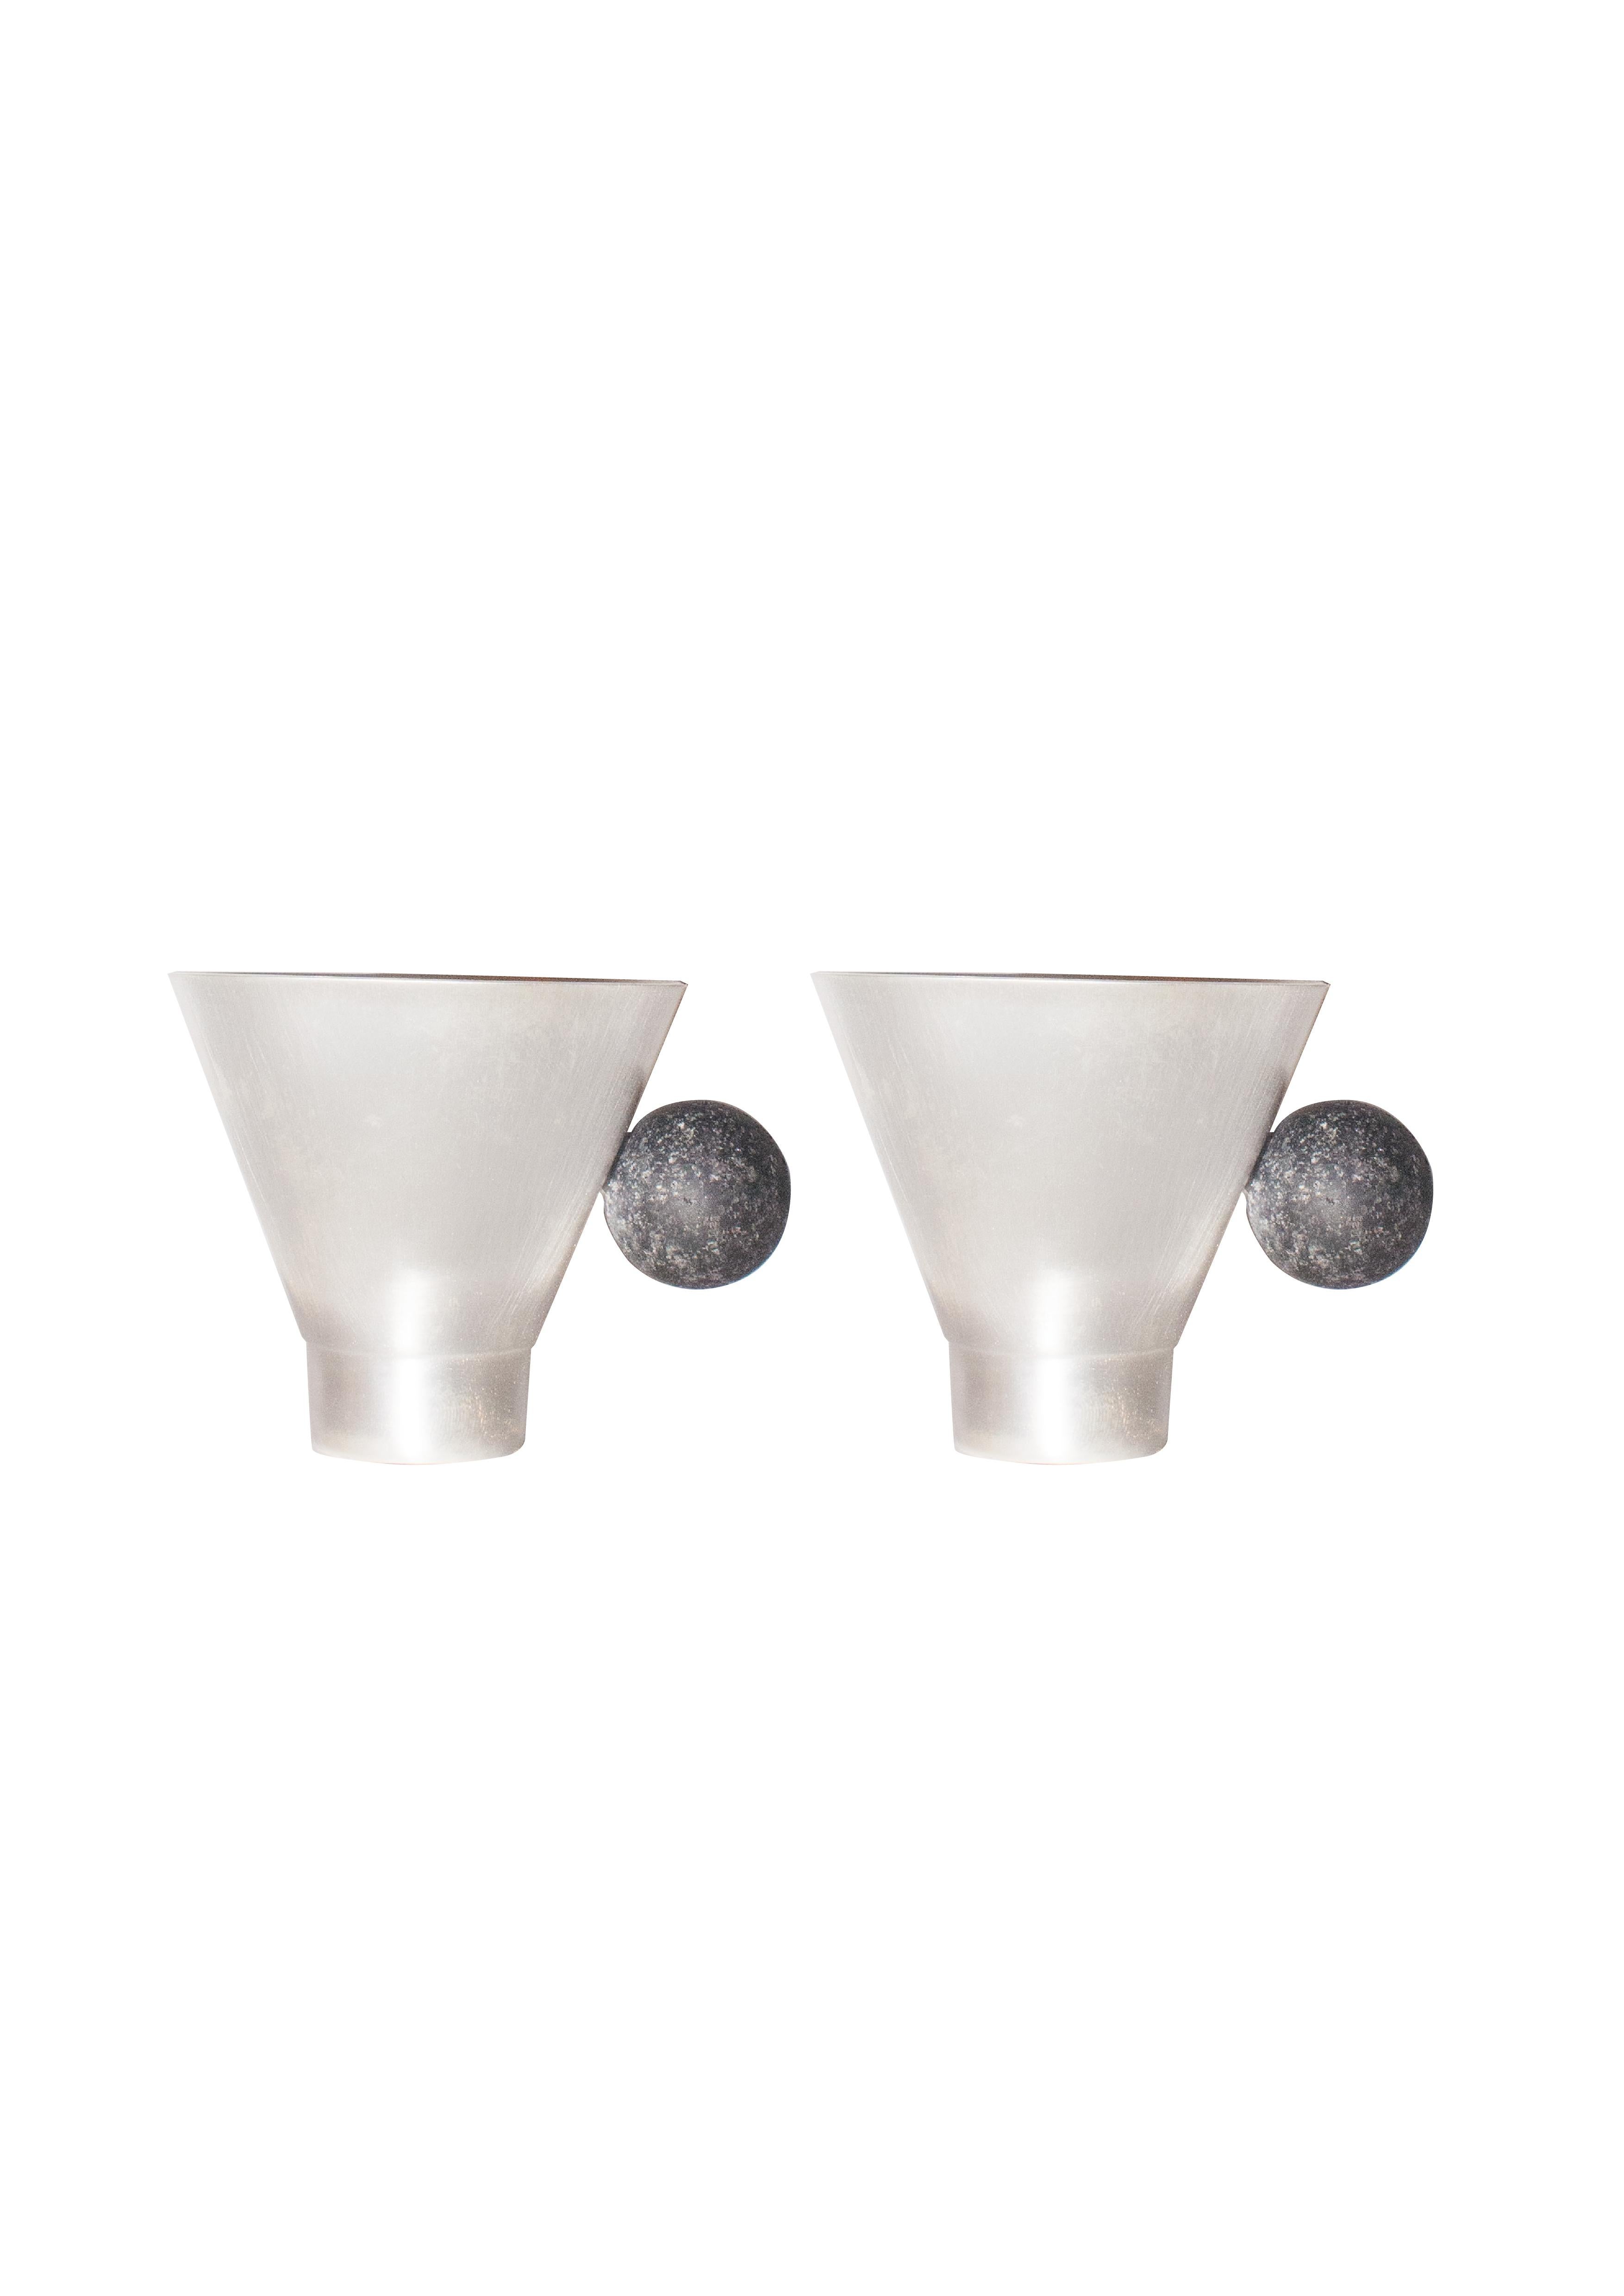  Contemporary Silver Plated Lava Stone Cup Handcrafted Italy by Natalia Criado (Beschichtet) im Angebot